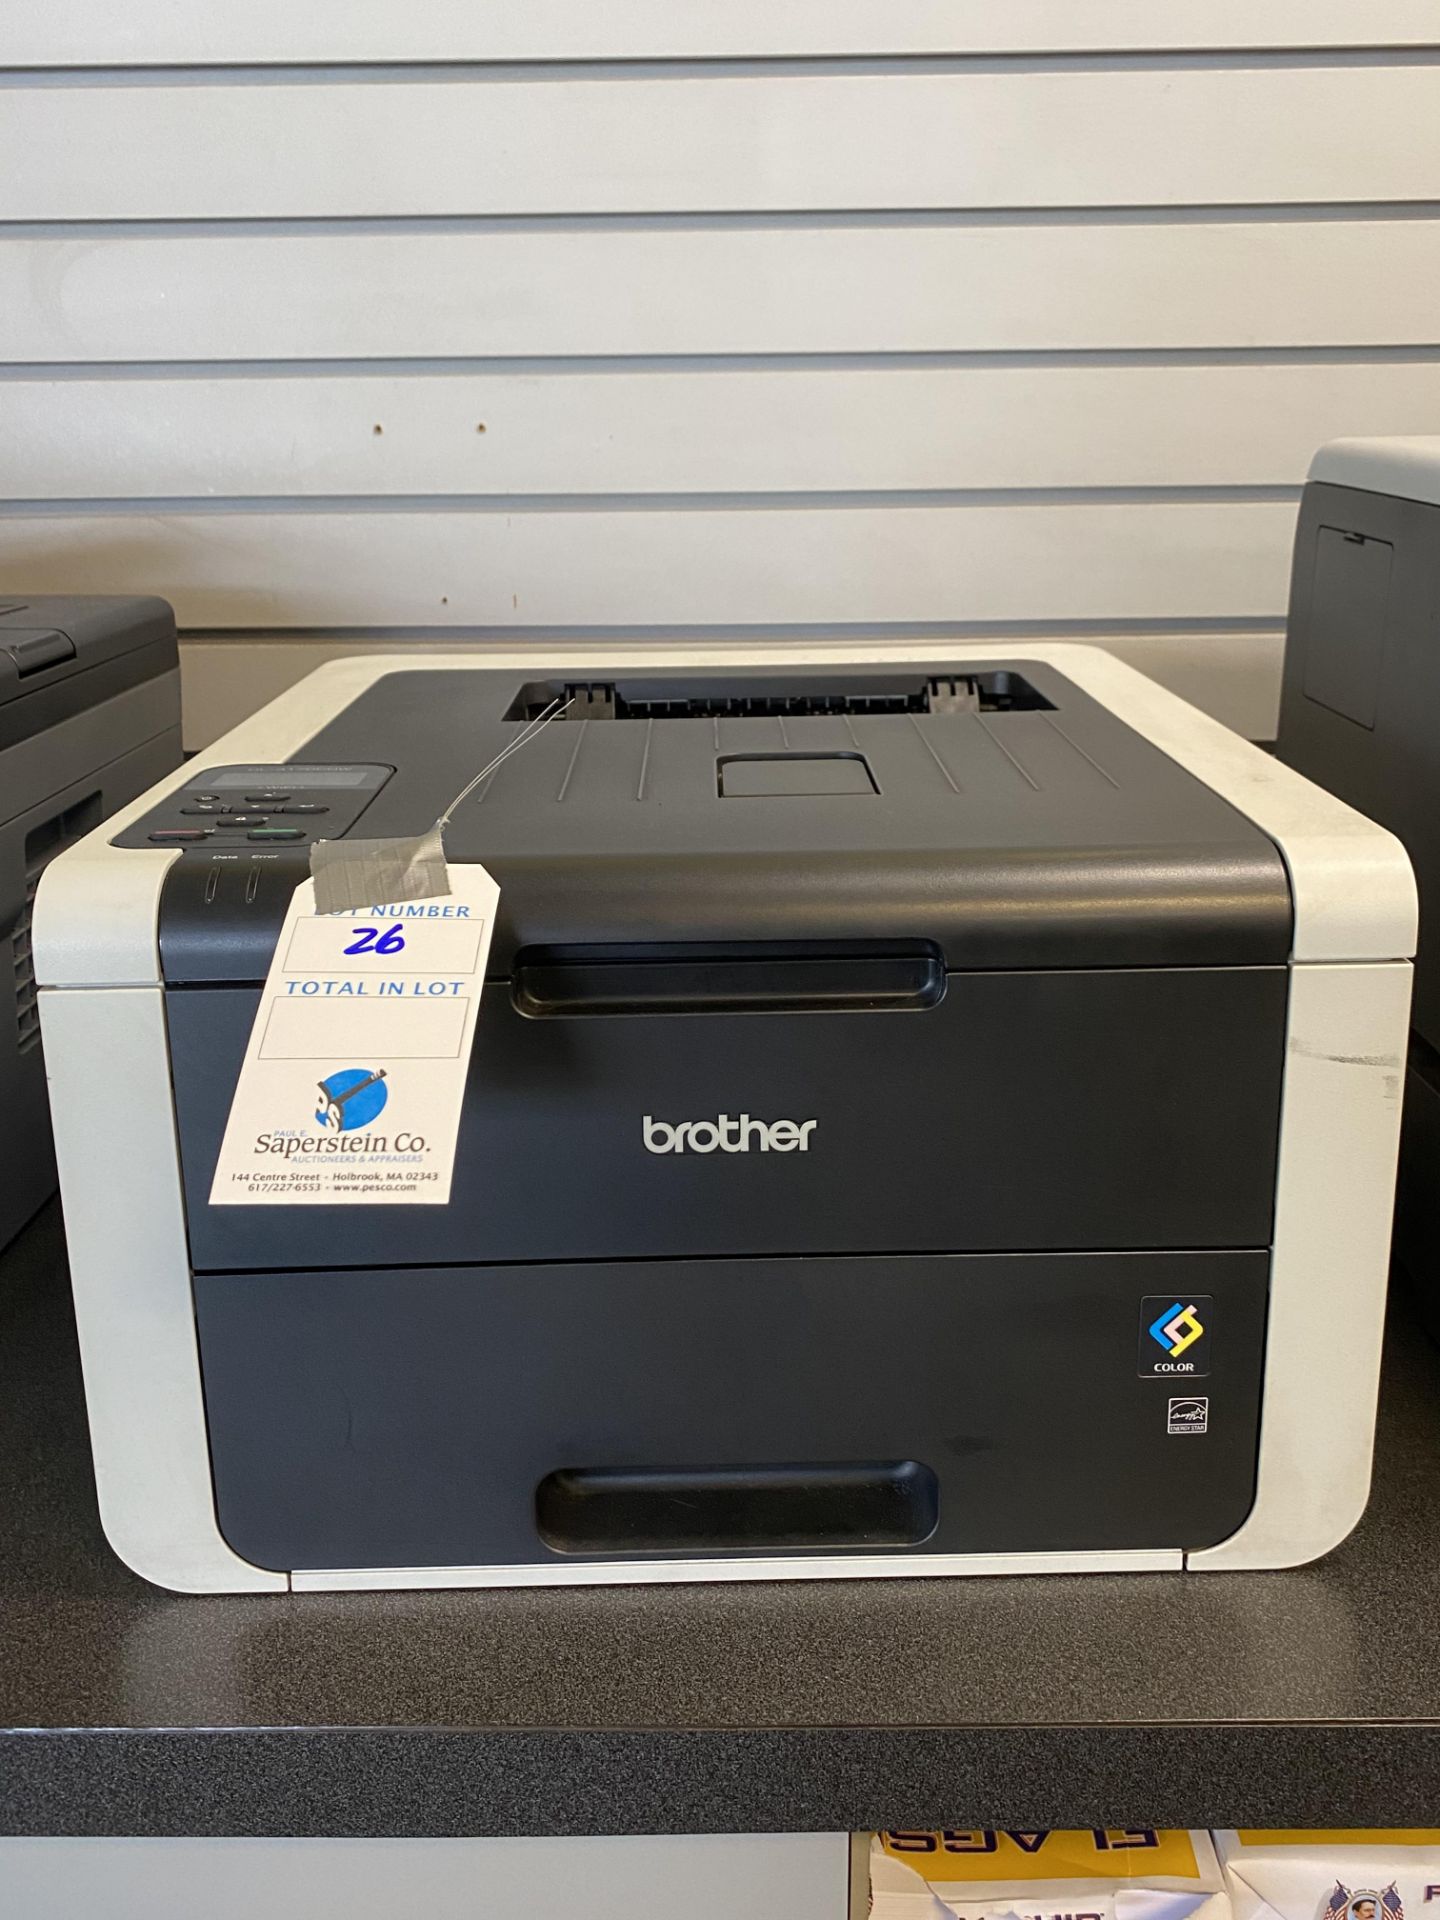 Brother Color Printer Model# HL3170CPW